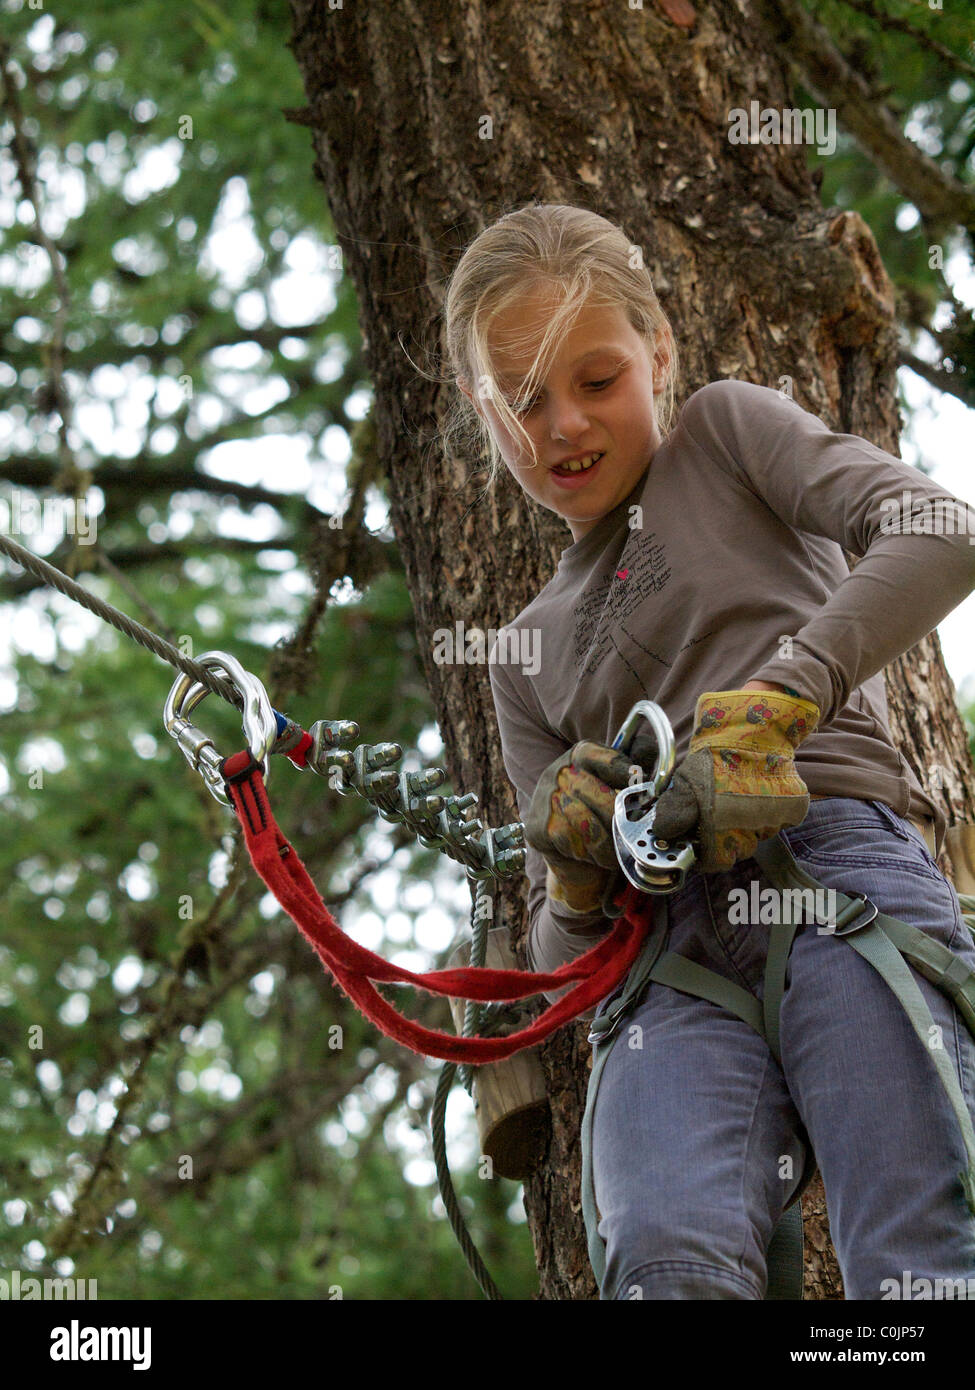 Girl 10 years old, securing herself with two cables in climbing park Les Orres, French Alps, France Stock Photo